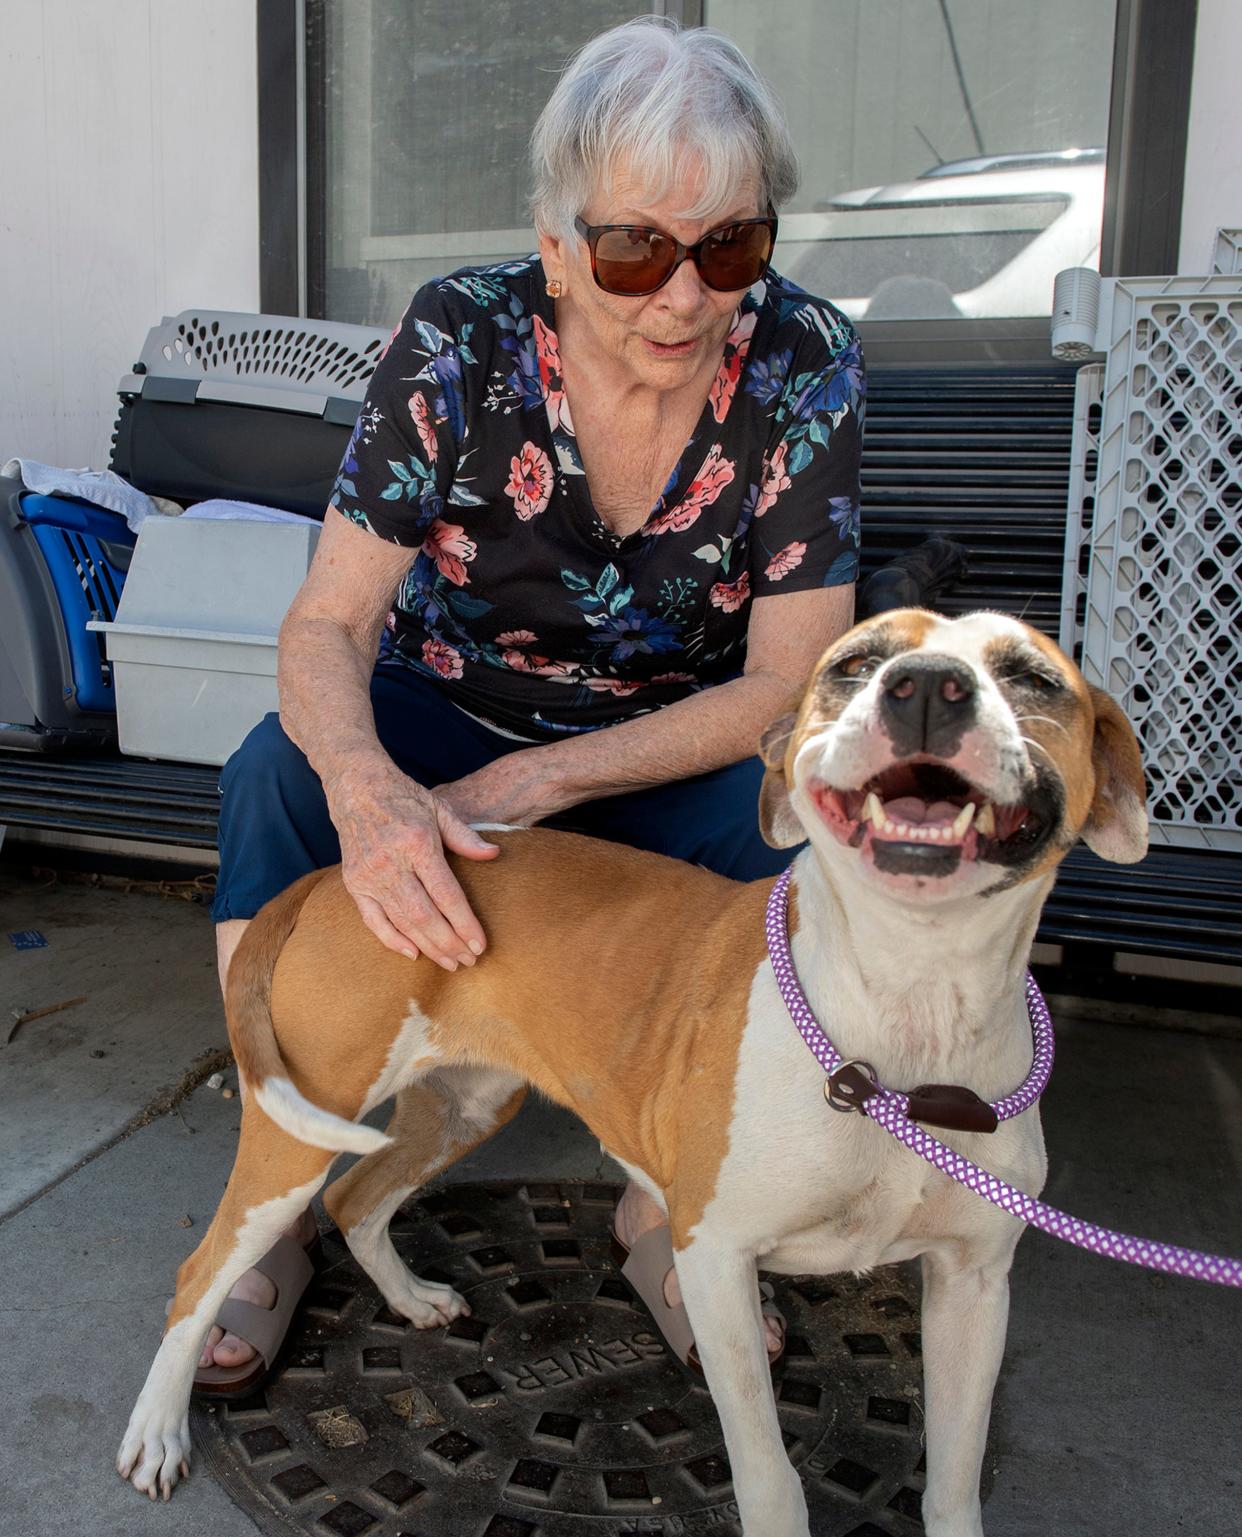 Gerry Kilgore of Salida checks out "Charlie" during the Clear the Shelter event at the Stockton Animal Shelter in south Stockton on Saturday, August 20, 2022. More than 80 dogs and cats were available for free adoption to help relieve overcrowding at the shelter.